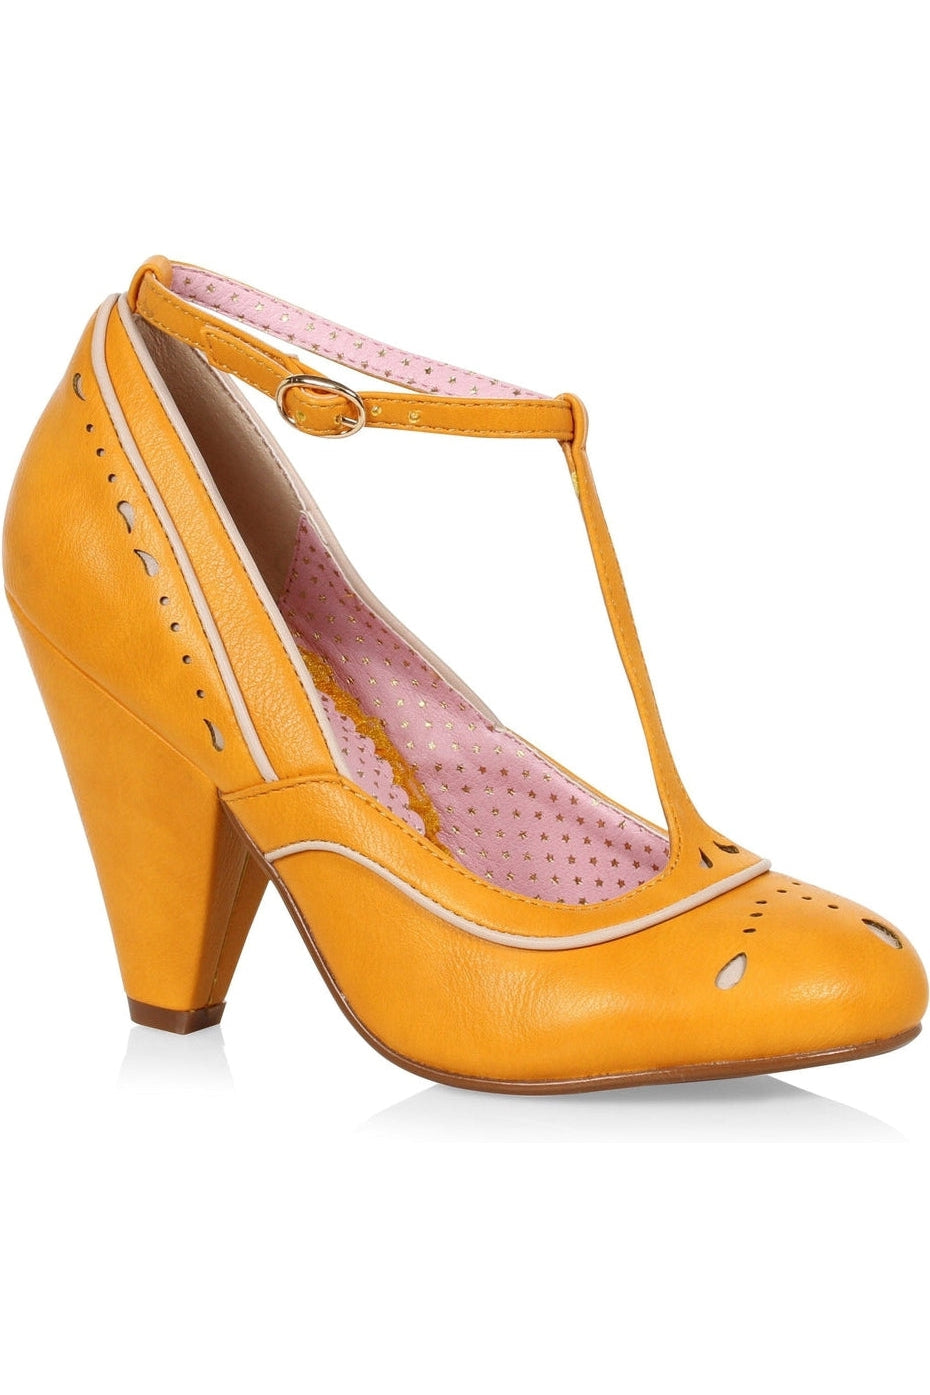 Bettie Page Annie Pump | Yellow Faux Leather-Pumps-Bettie Page by Ellie-SEXYSHOES.COM